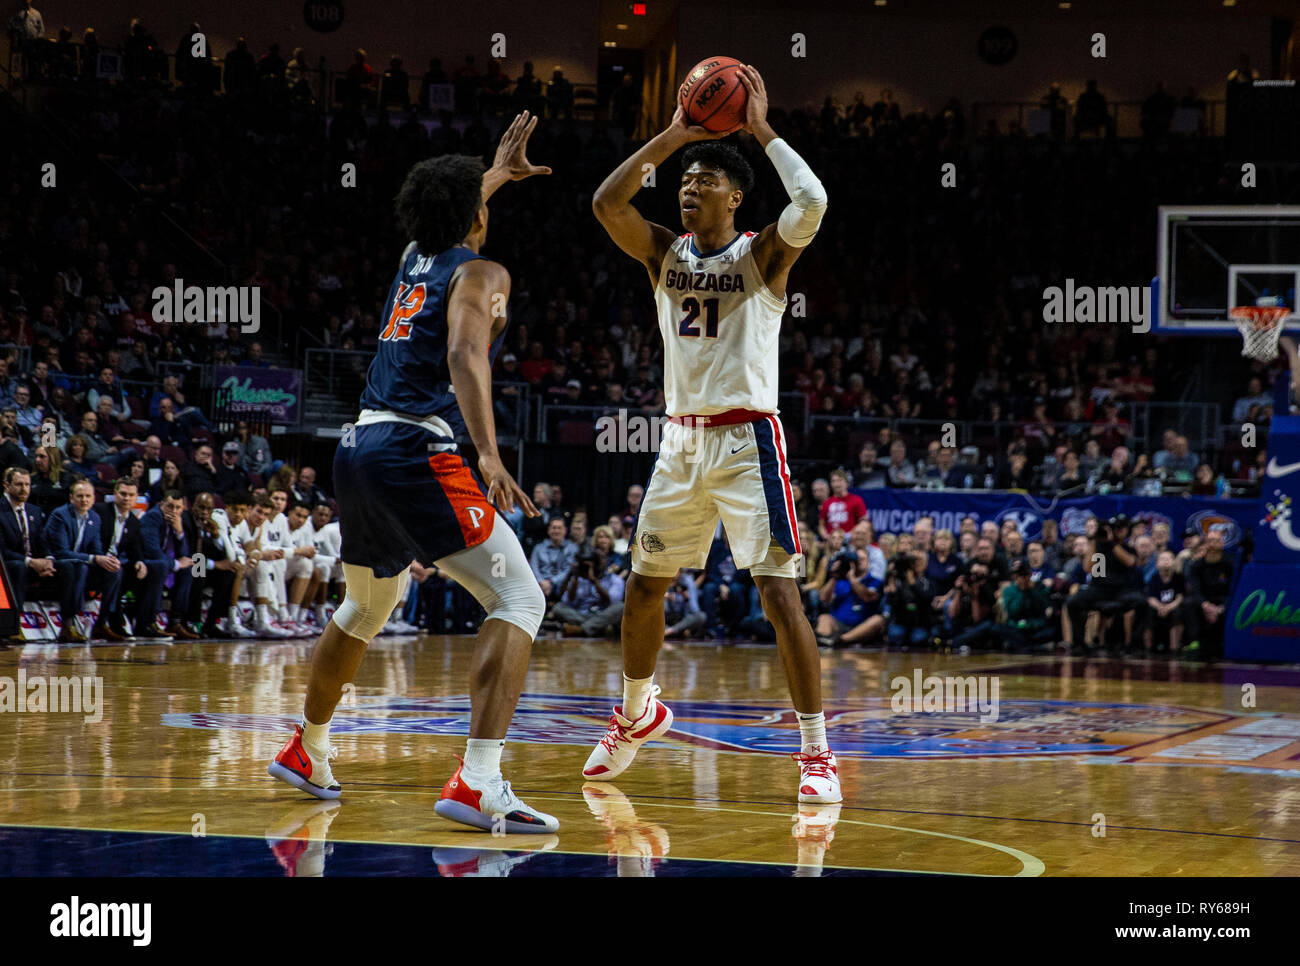 Mar 11 2019 Las Vegas, NV, U.S.A. Gonzaga forward Rui Hachimura (21) looks to pass the ball during the NCAA West Coast Conference Men's Basketball Tournament semi -final between the Pepperdine Wave and the Gonzaga Bulldogs 100-74 win at Orleans Arena Las Vegas, NV. Thurman James/CSM Stock Photo